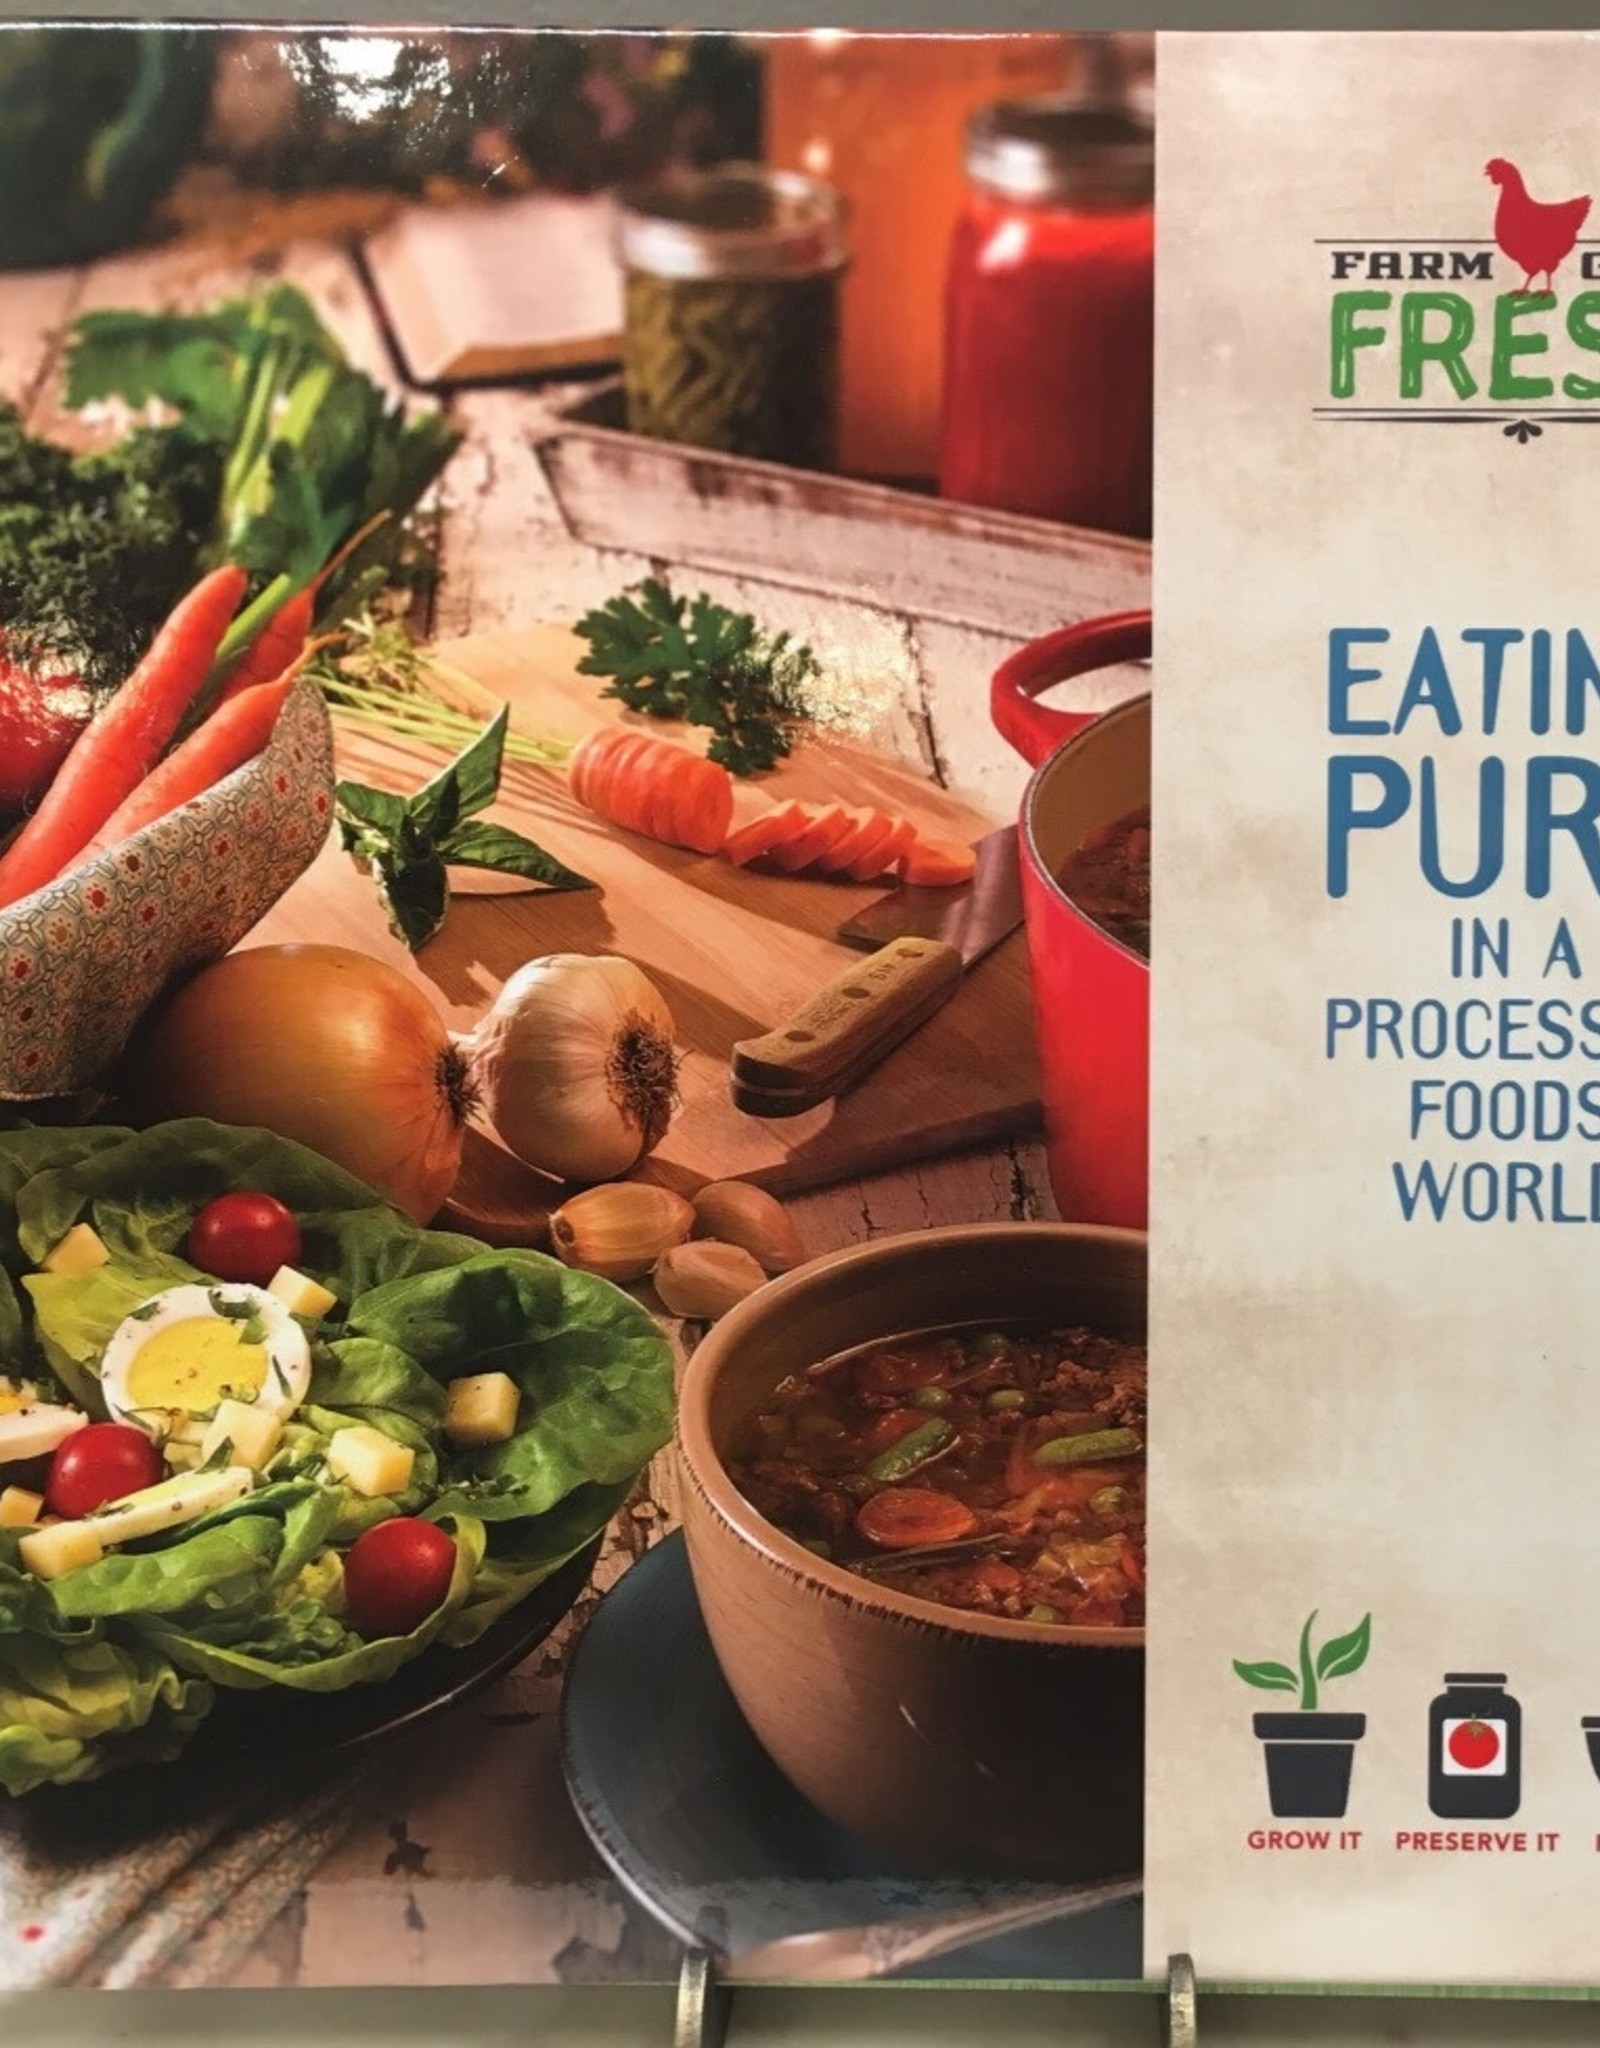 Book "Eating Pure in a Processed Foods World" 2nd Edition